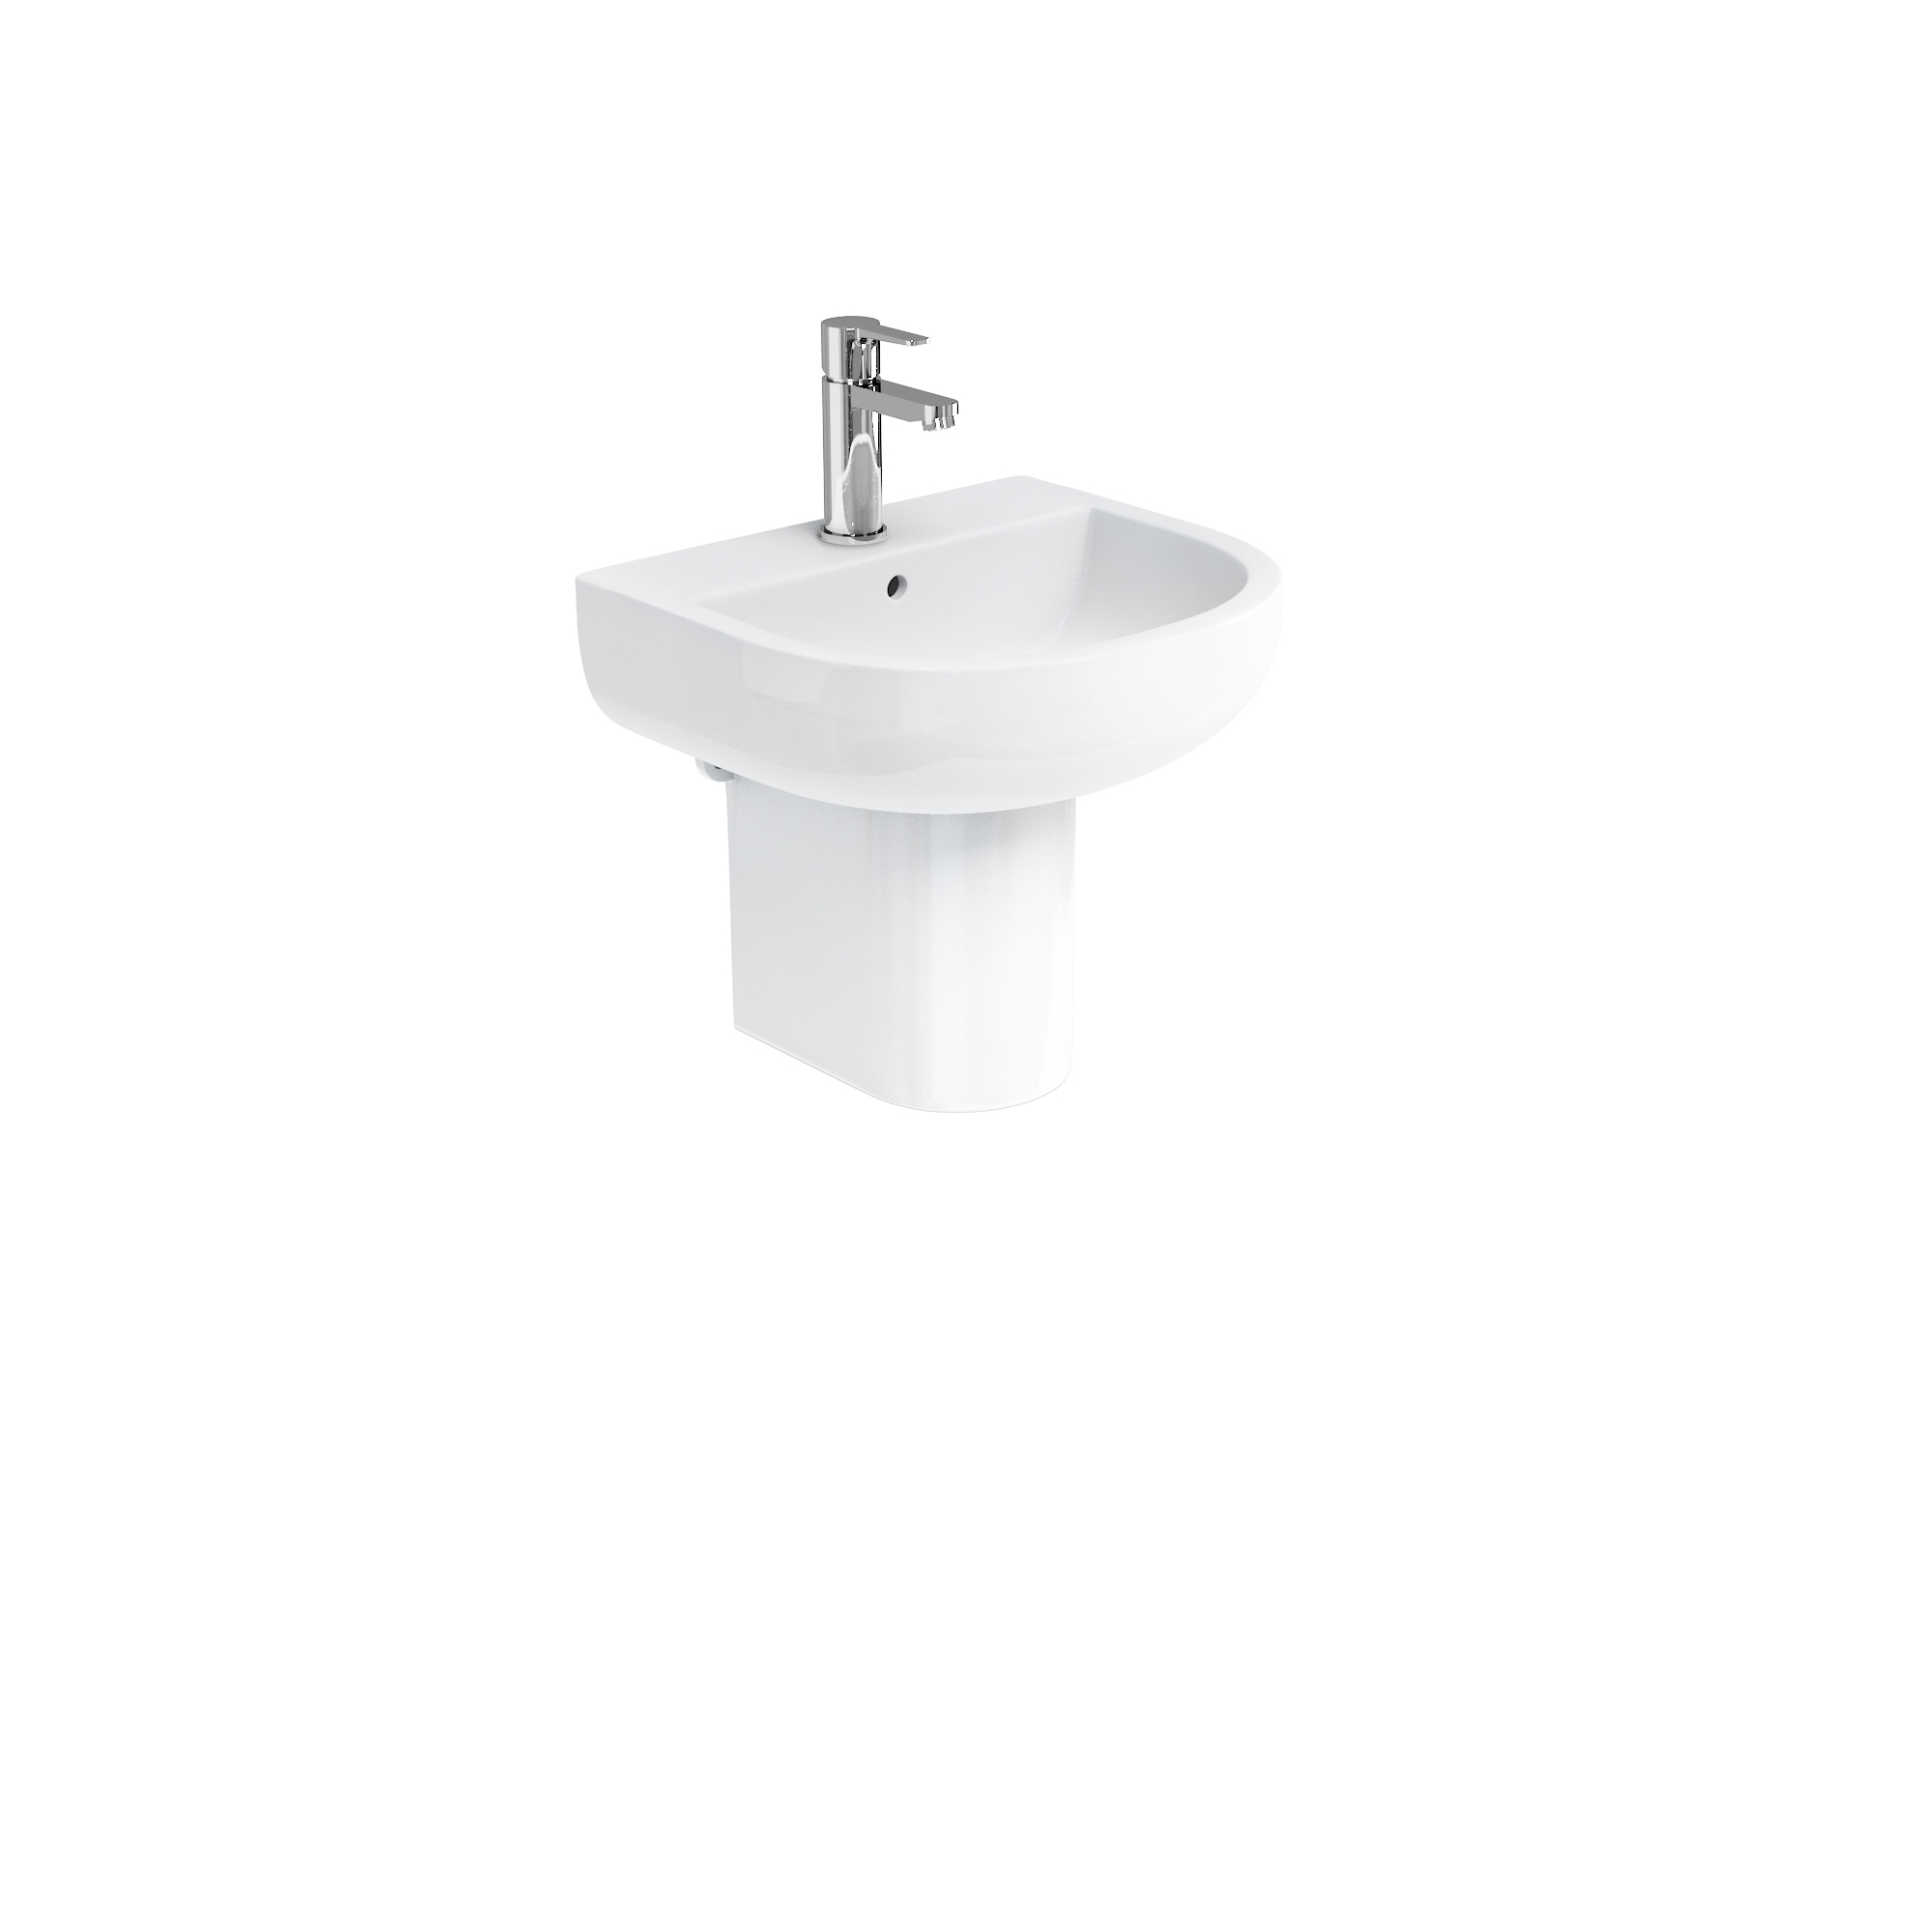 Compact 450 basin and round fronted semi pedestal